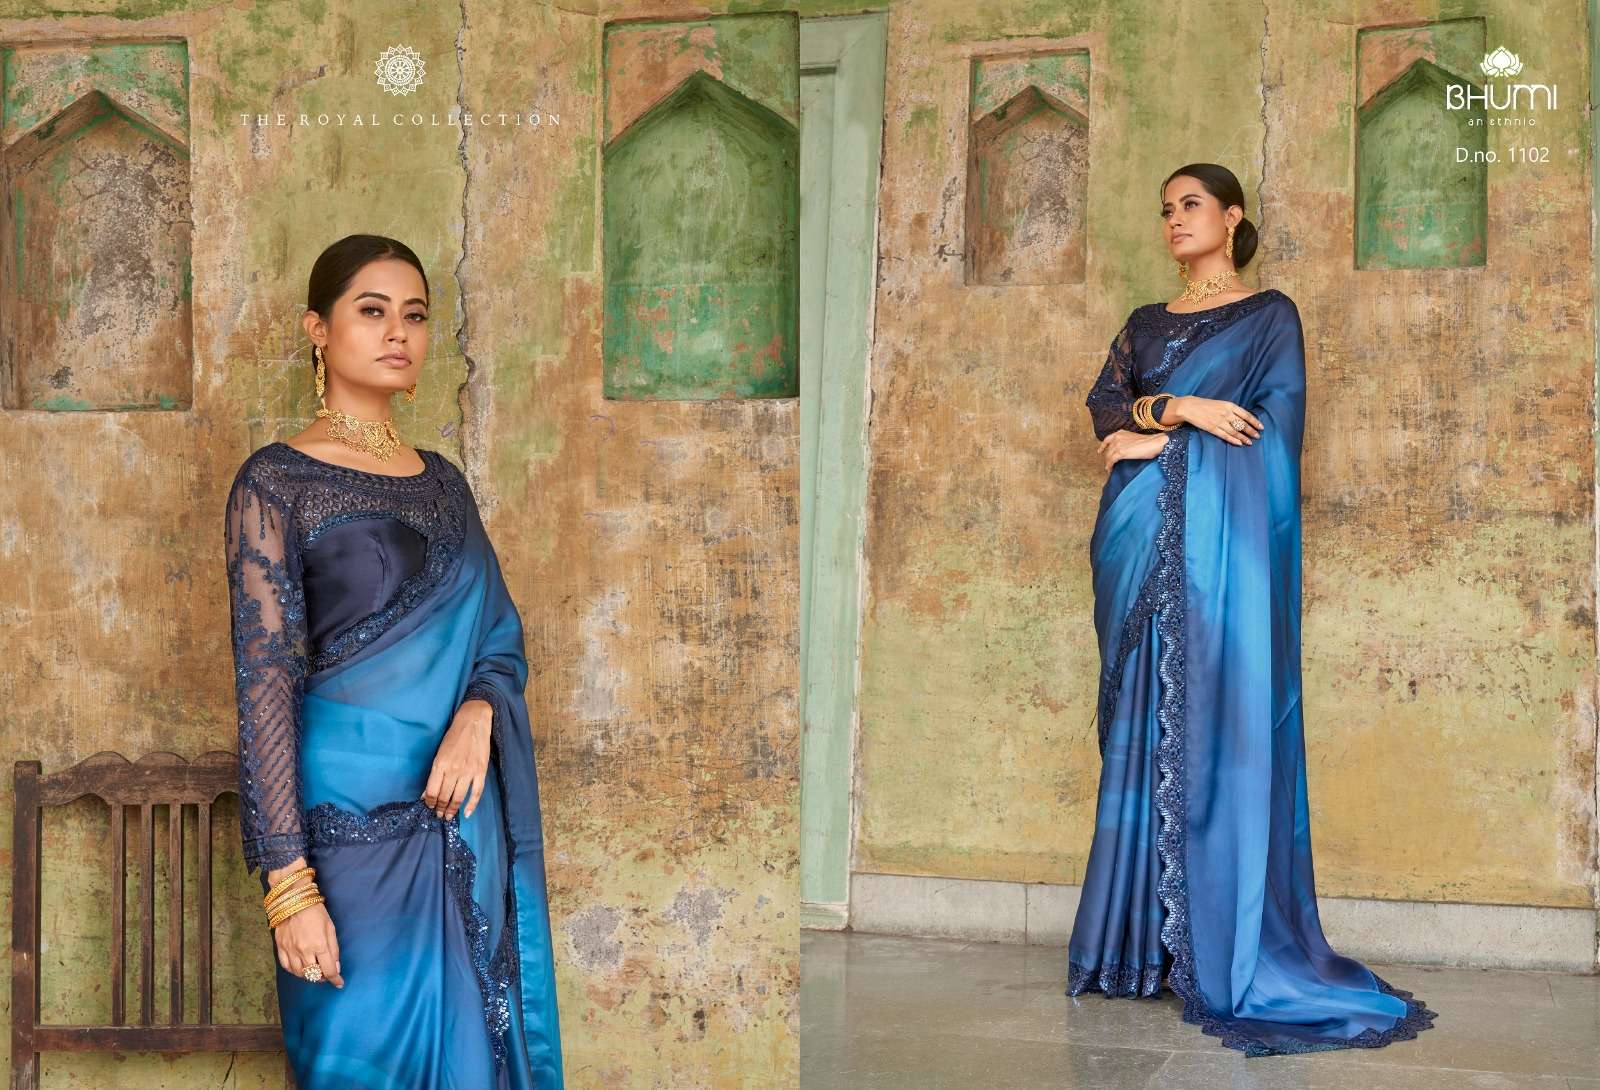 Zuri By Bhumi 1101 To 1108 Series Indian Traditional Wear Collection Beautiful Stylish Fancy Colorful Party Wear & Occasional Wear Satin Digital Print Sarees At Wholesale Price